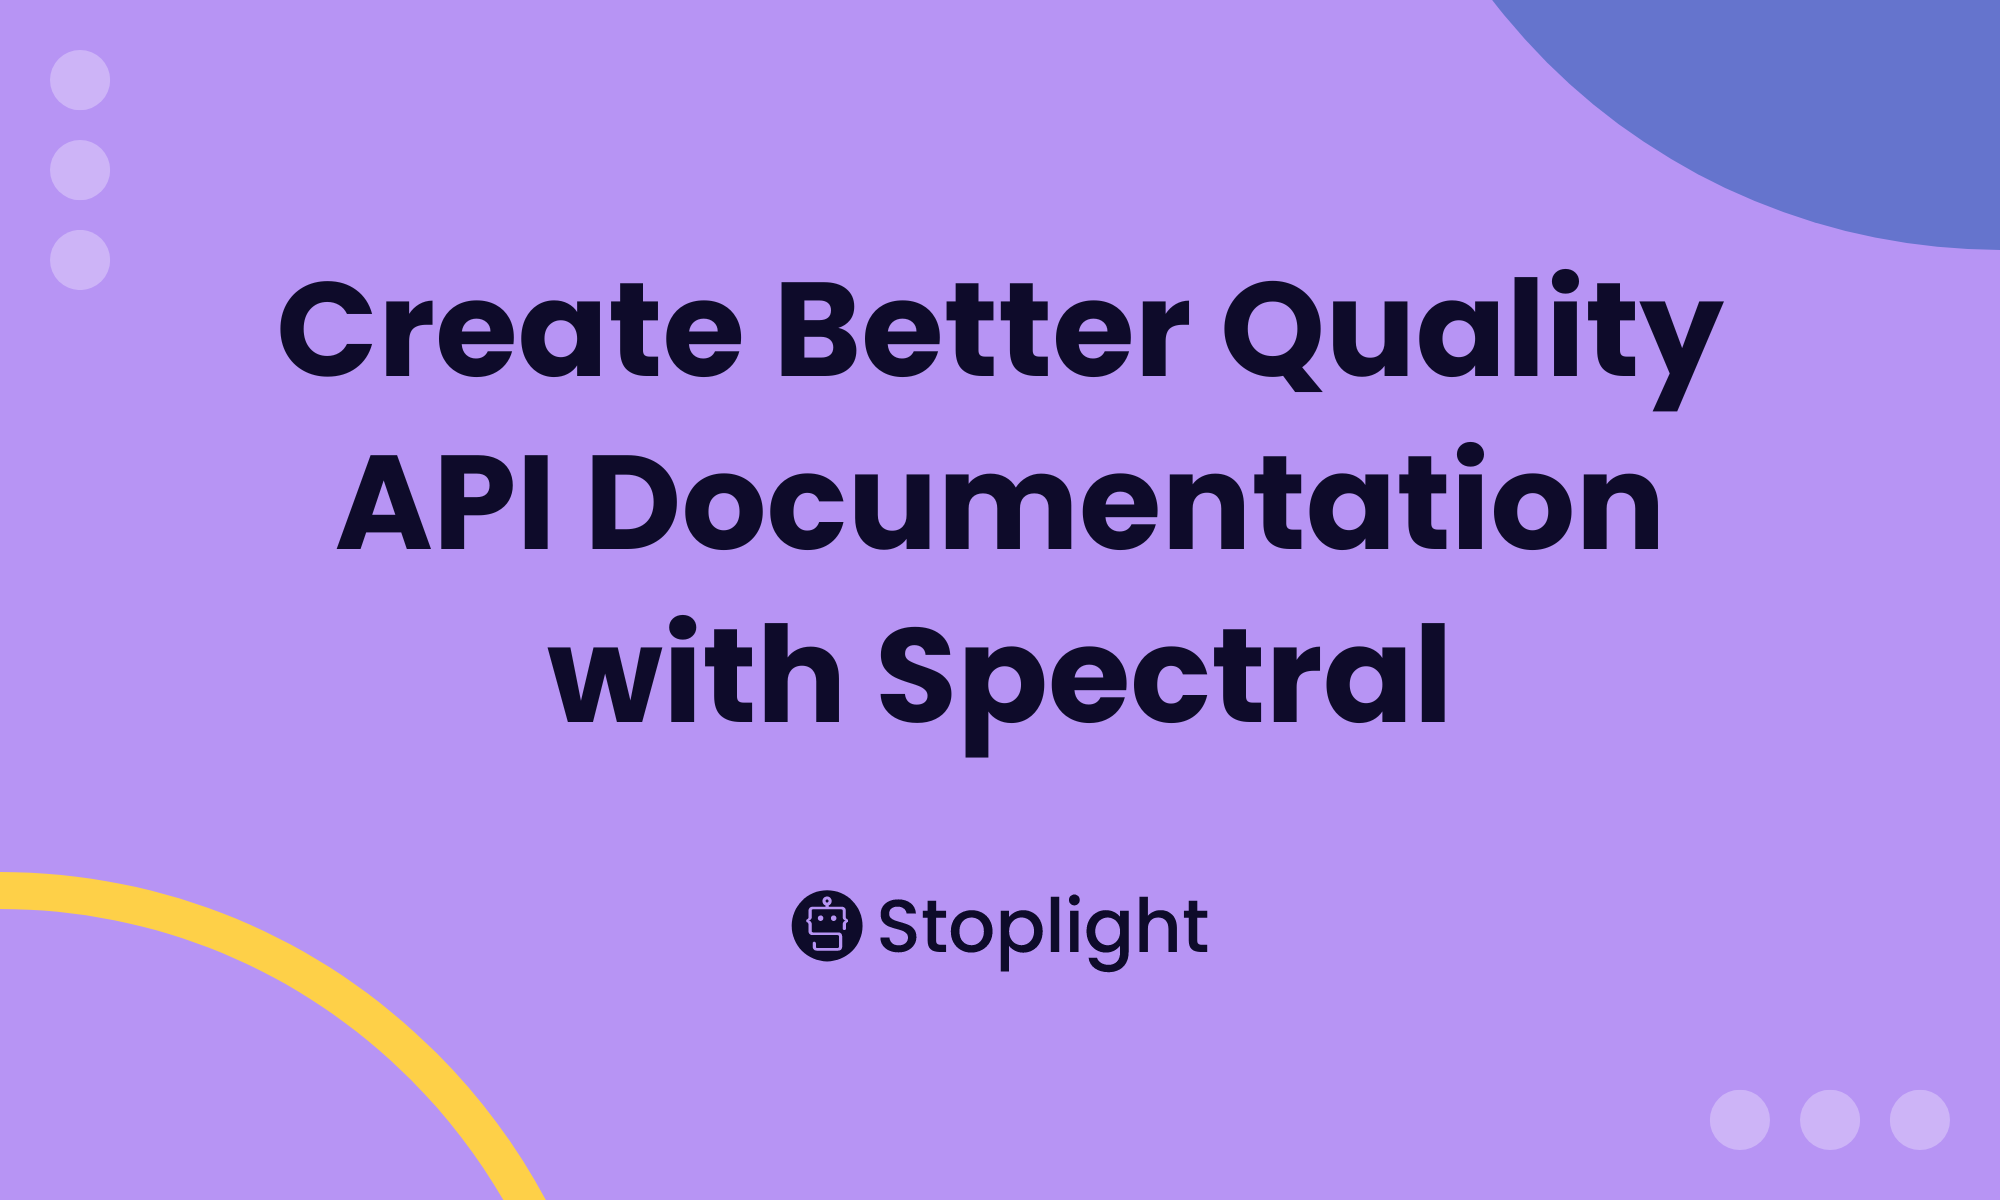 Create Better Quality API Documentation with Spectral